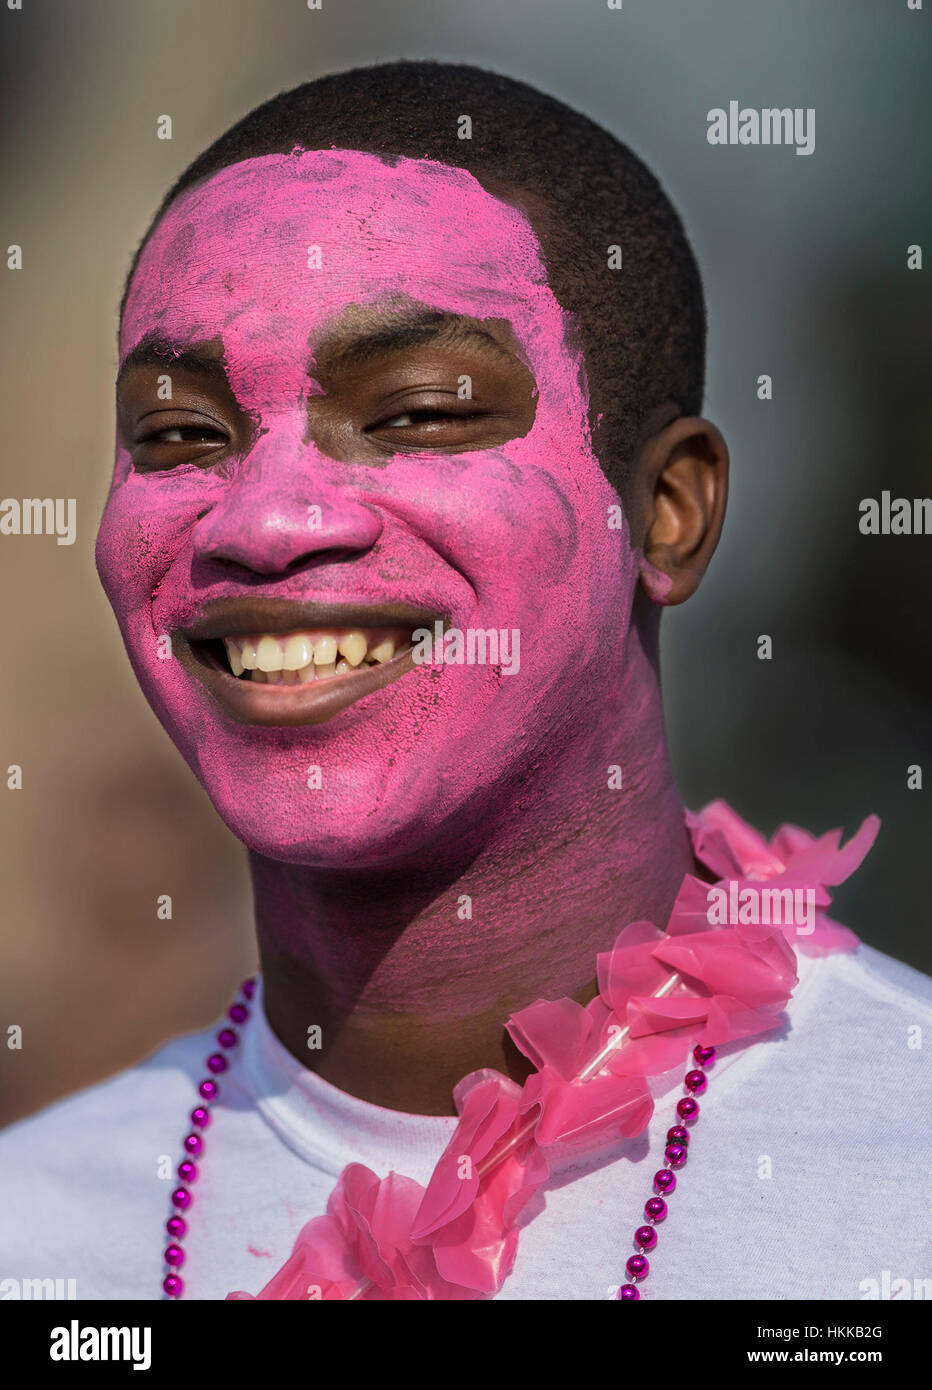 West Palm Beach, Florida, USA. 28th Jan, 2017. Corey Vaughn-Patterson, of West Palm Beach, painted pink for the 2017 Susan G. Komen Race for the Cure in West Palm Beach, January 28, 2017. Credit: Greg Lovett/The Palm Beach Post/ZUMA Wire/Alamy Live News Stock Photo